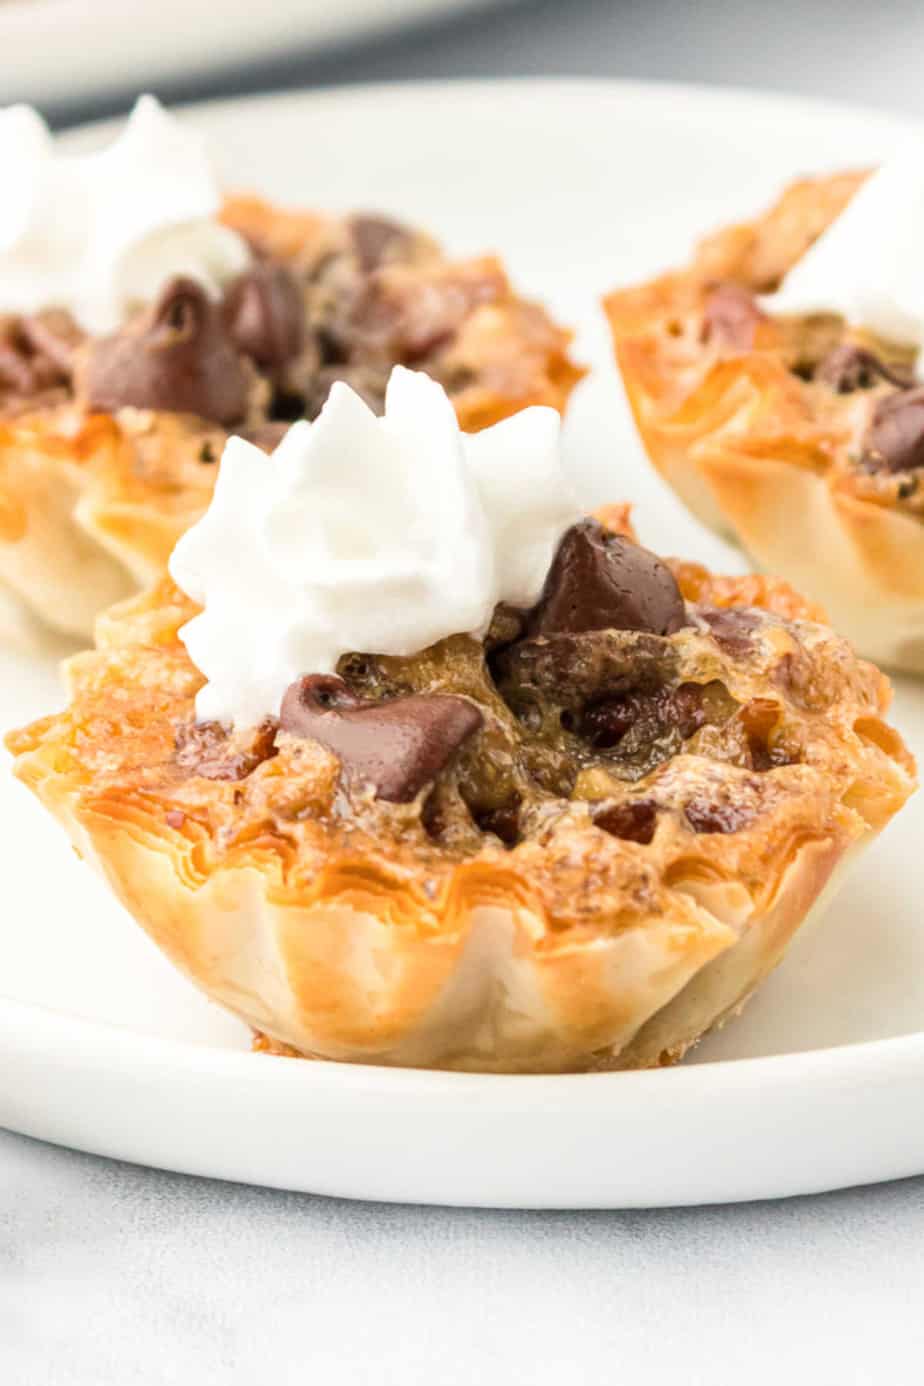 Mini pecan chocolate pie bites topped with whipped cream close up